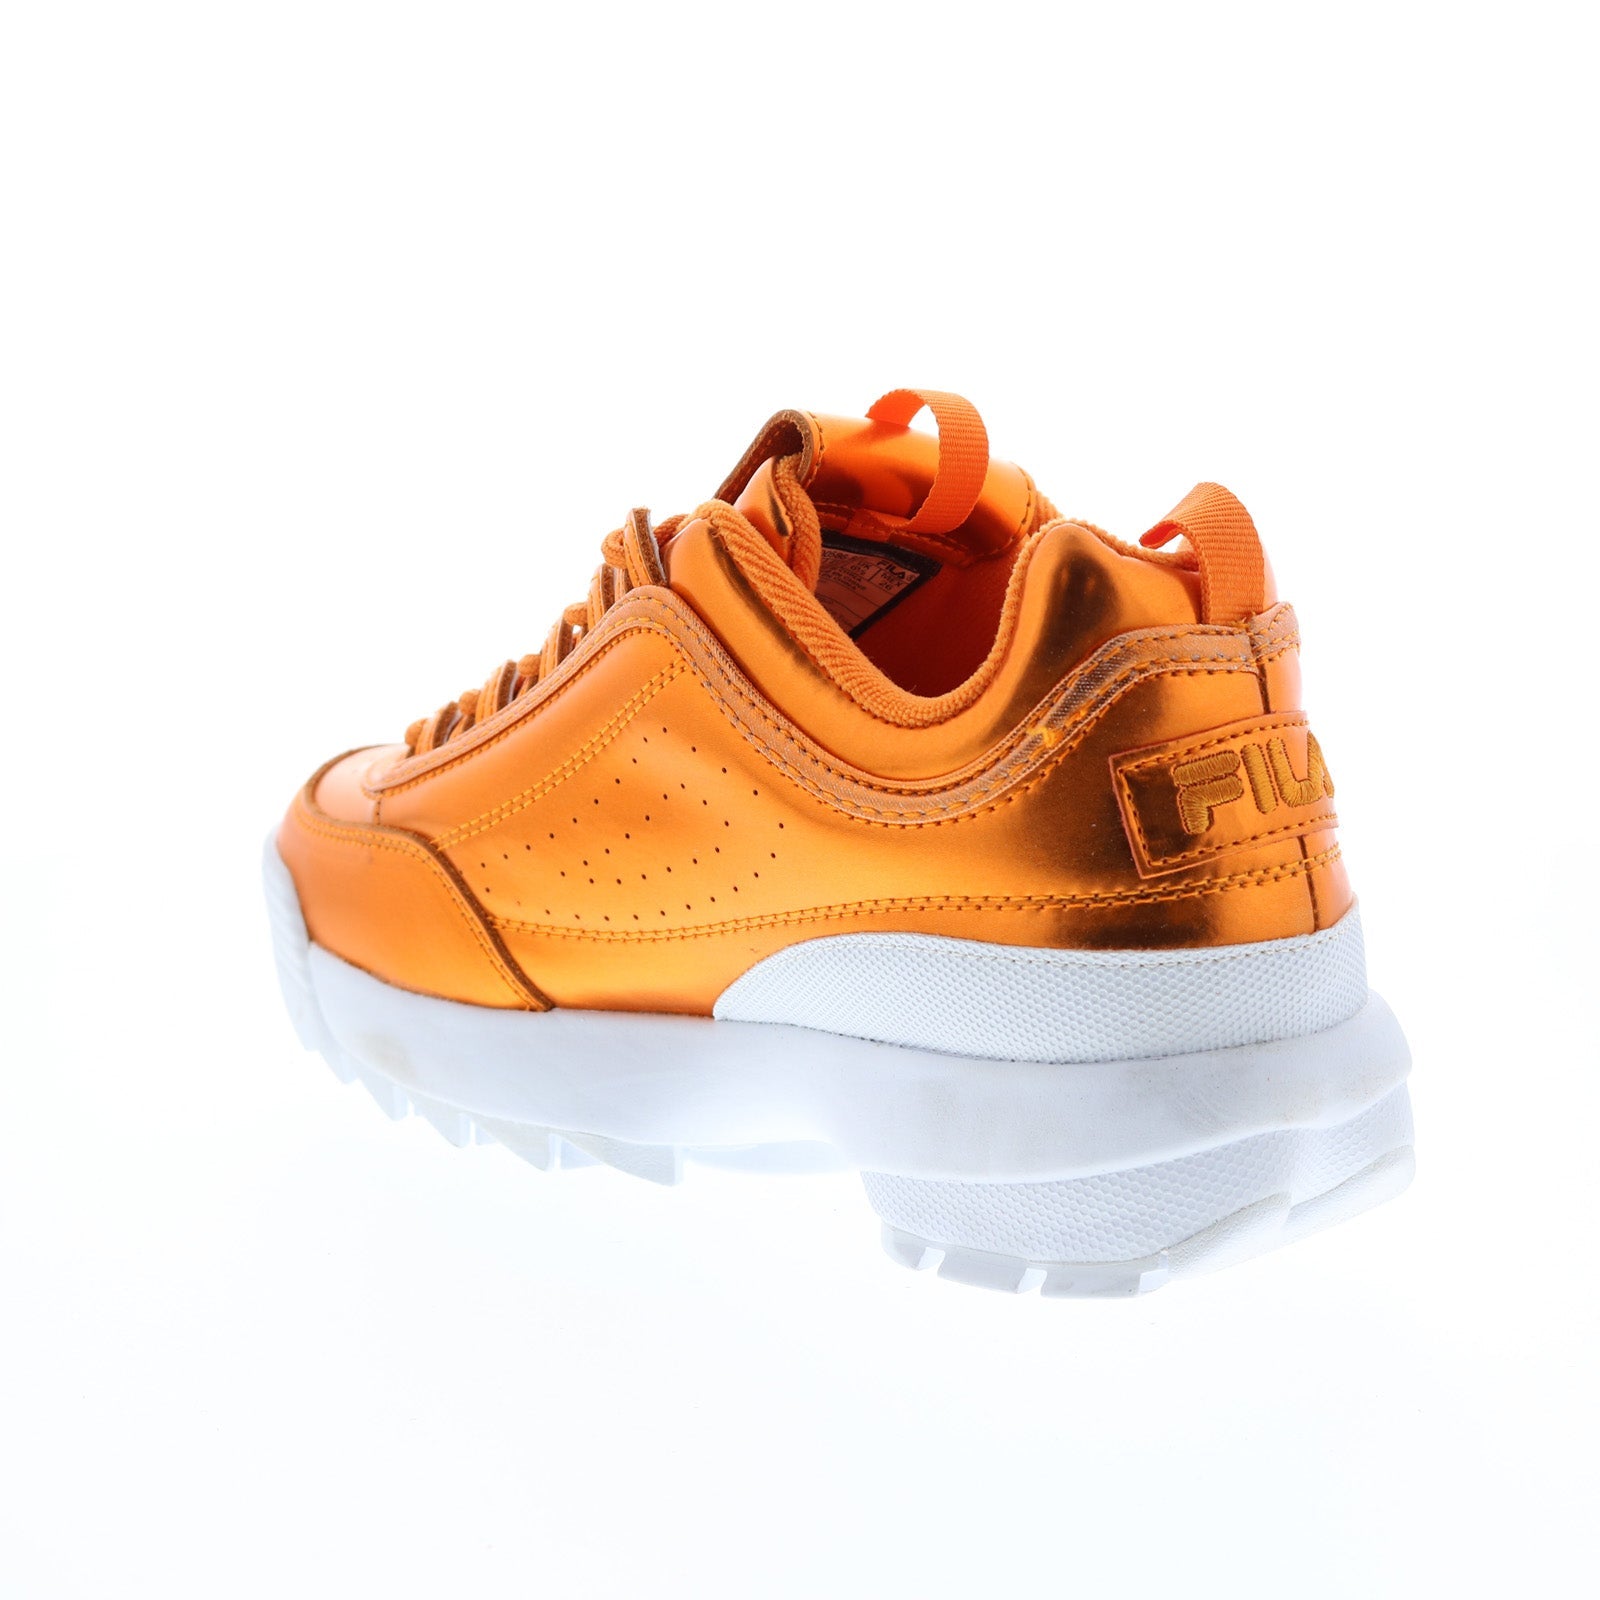 Fila Disruptor II Spring Pack Womens Orange Lifestyle Sneakers Shoes - Ruze  Shoes